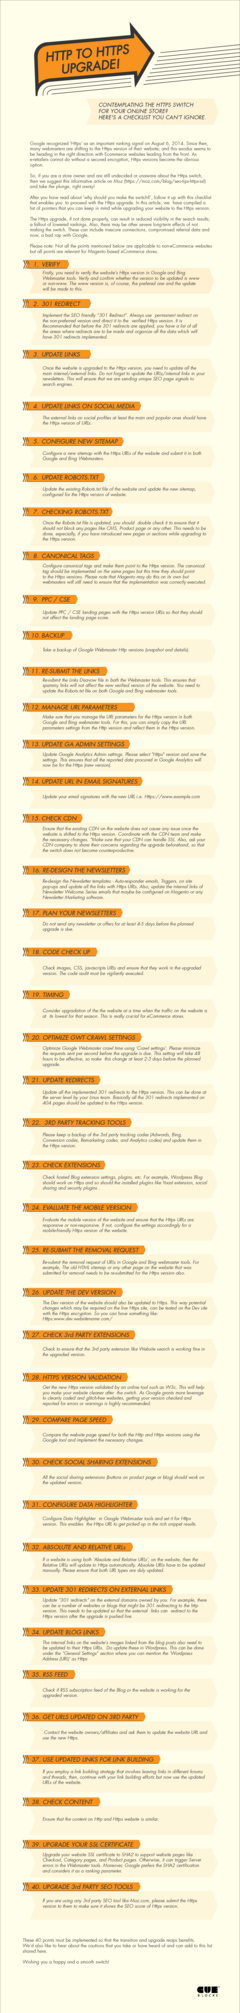 HTTP to HTTPS Checklist - Infographic